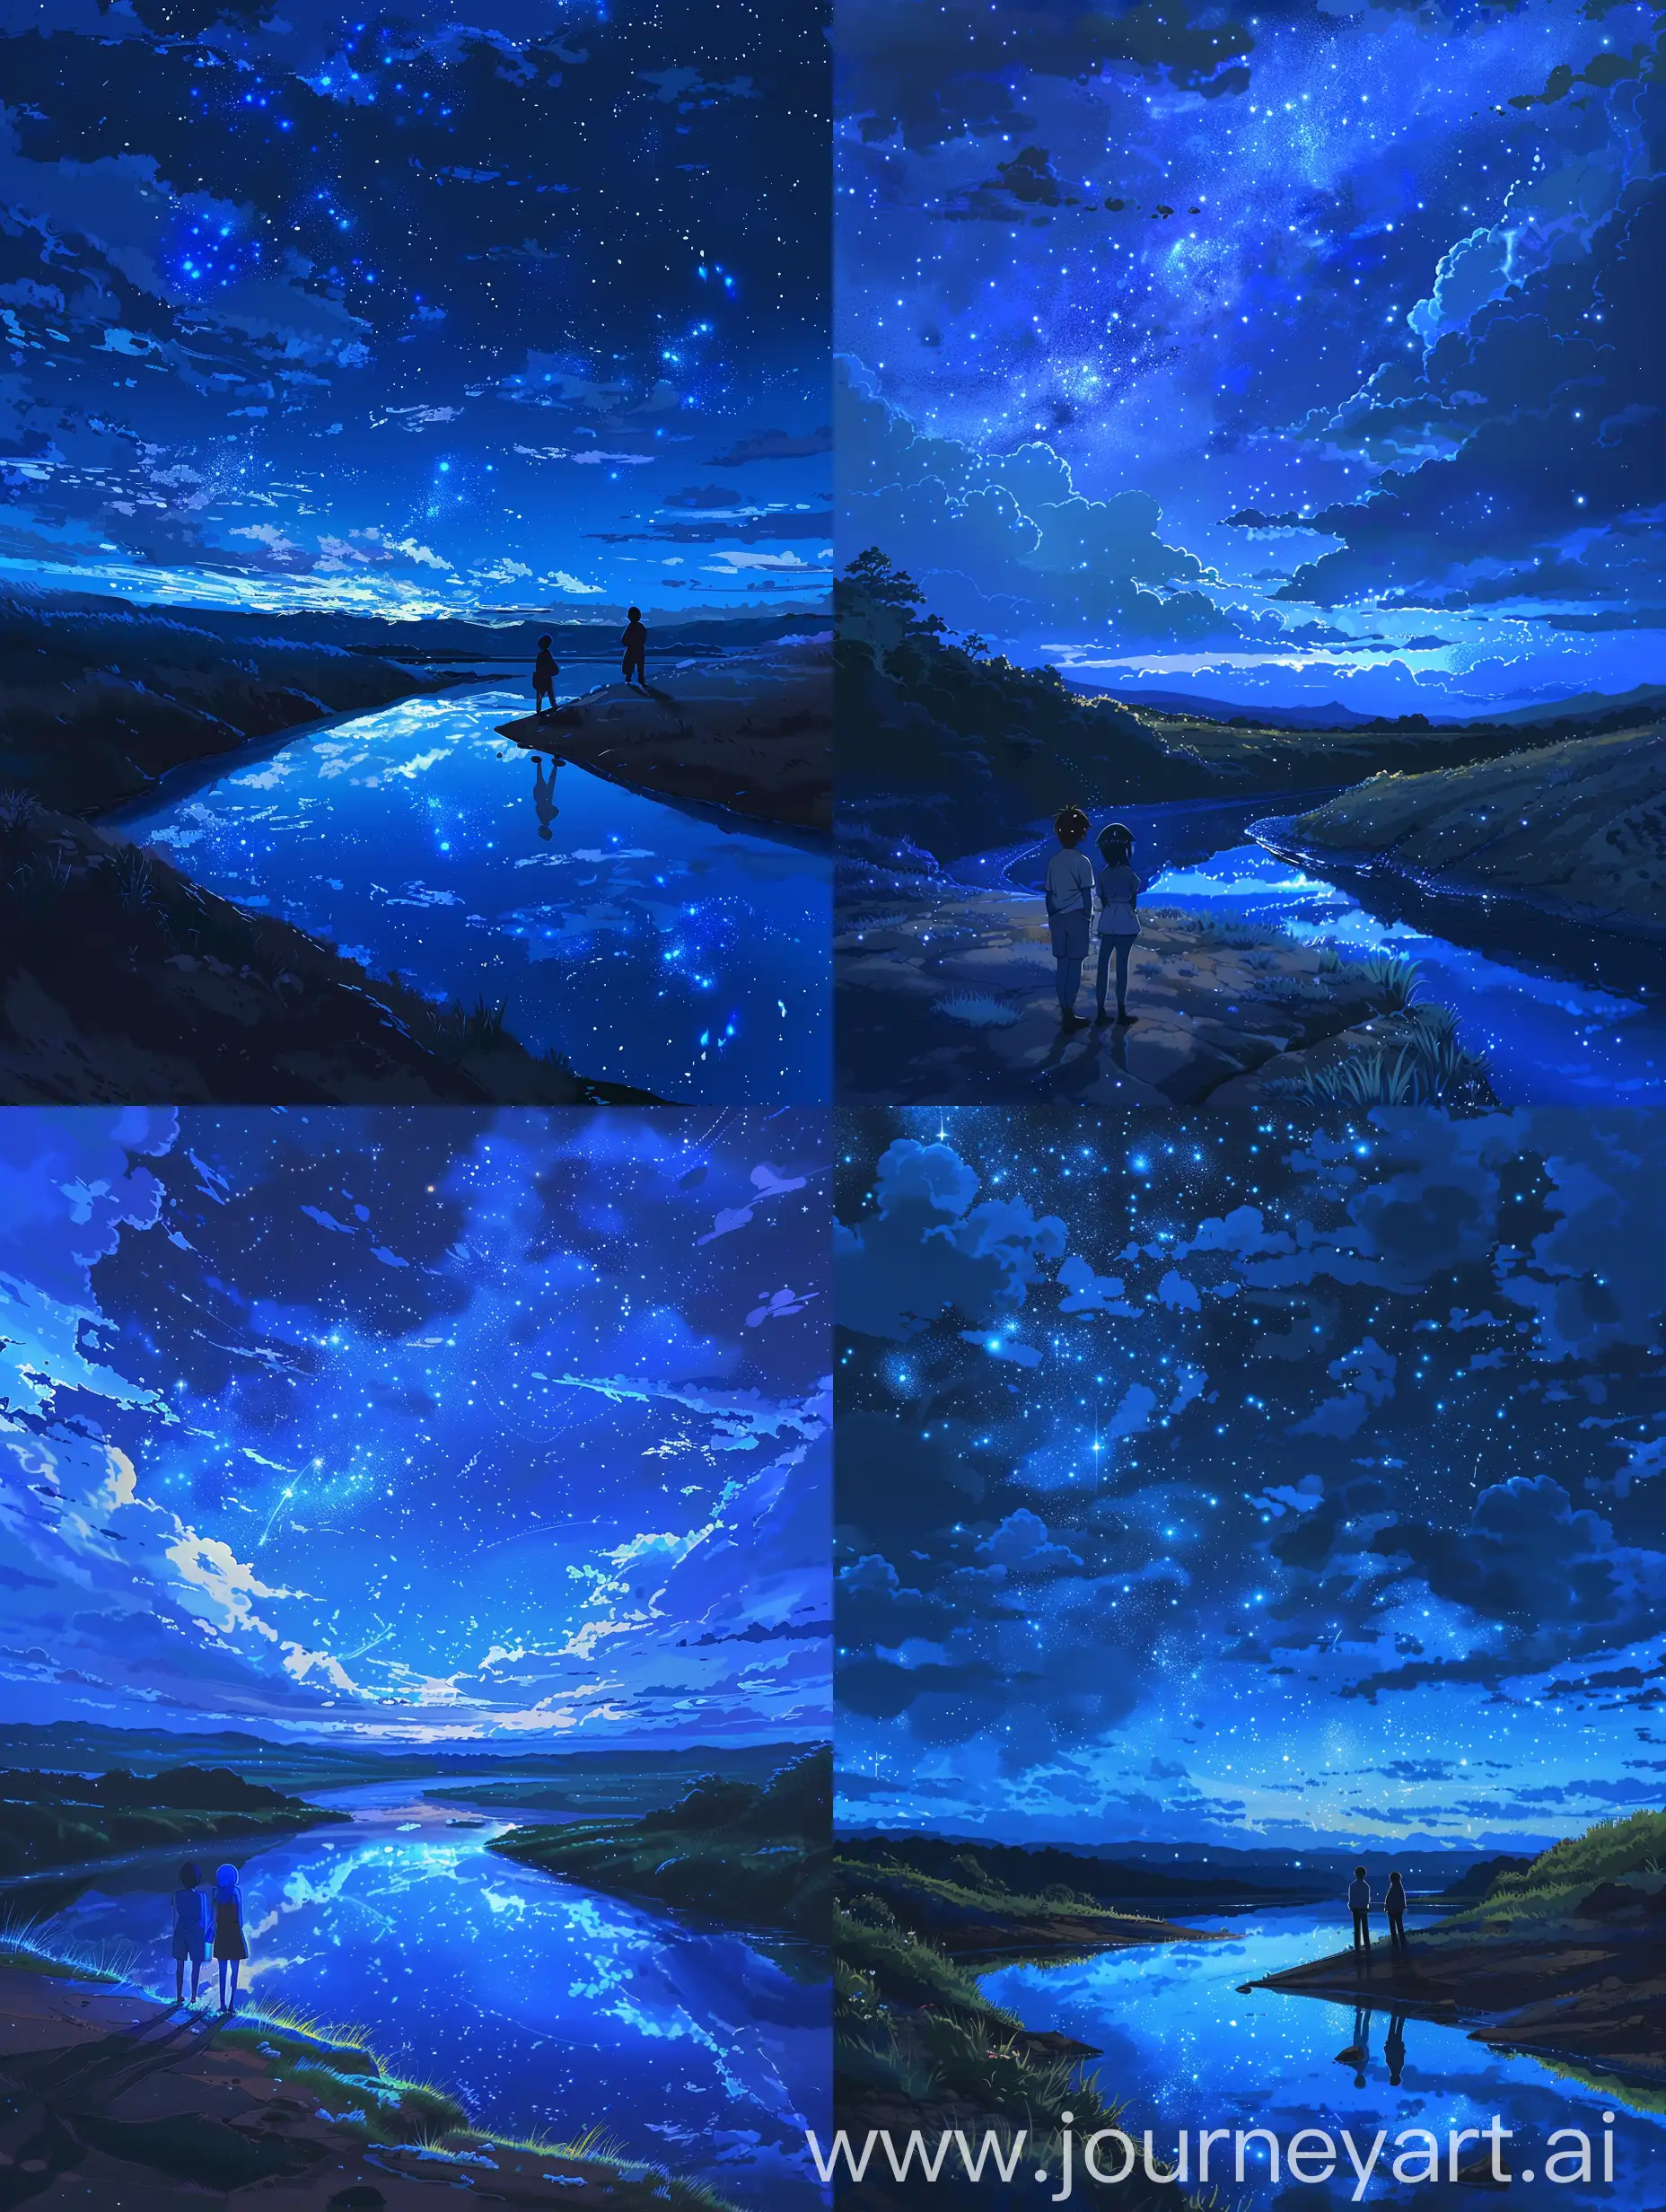 Anime style,a realism touch but Still stylized,a little bit touch of Ghibli Studio style,a little but touch of painting Proffesional style,high sharp textures of makato shinkai style but with a mix of a little bit of ghibli style,aesthetic touch,Beautiful celestial blue night,Two persons viewing the beautiful sky,the celestial blue night has spread the blue color all over,the environment is kissed by the blue night,beautiful celestial sky,beautiful view,best view,its a beautiful place its a flat hill surface with just a very little grass and very few trees and a small river reflecting the beautiful celestial night,avoid distorted and bad view of the person and their face,avoid a bad view,avoid bad body view and distorted view of the person,there are no clouds sky is filled with beautiful stars,galactic night sky,aesthetic anime sharp detail,the river is ver small just on the side,the night should be fully view a galactic night.